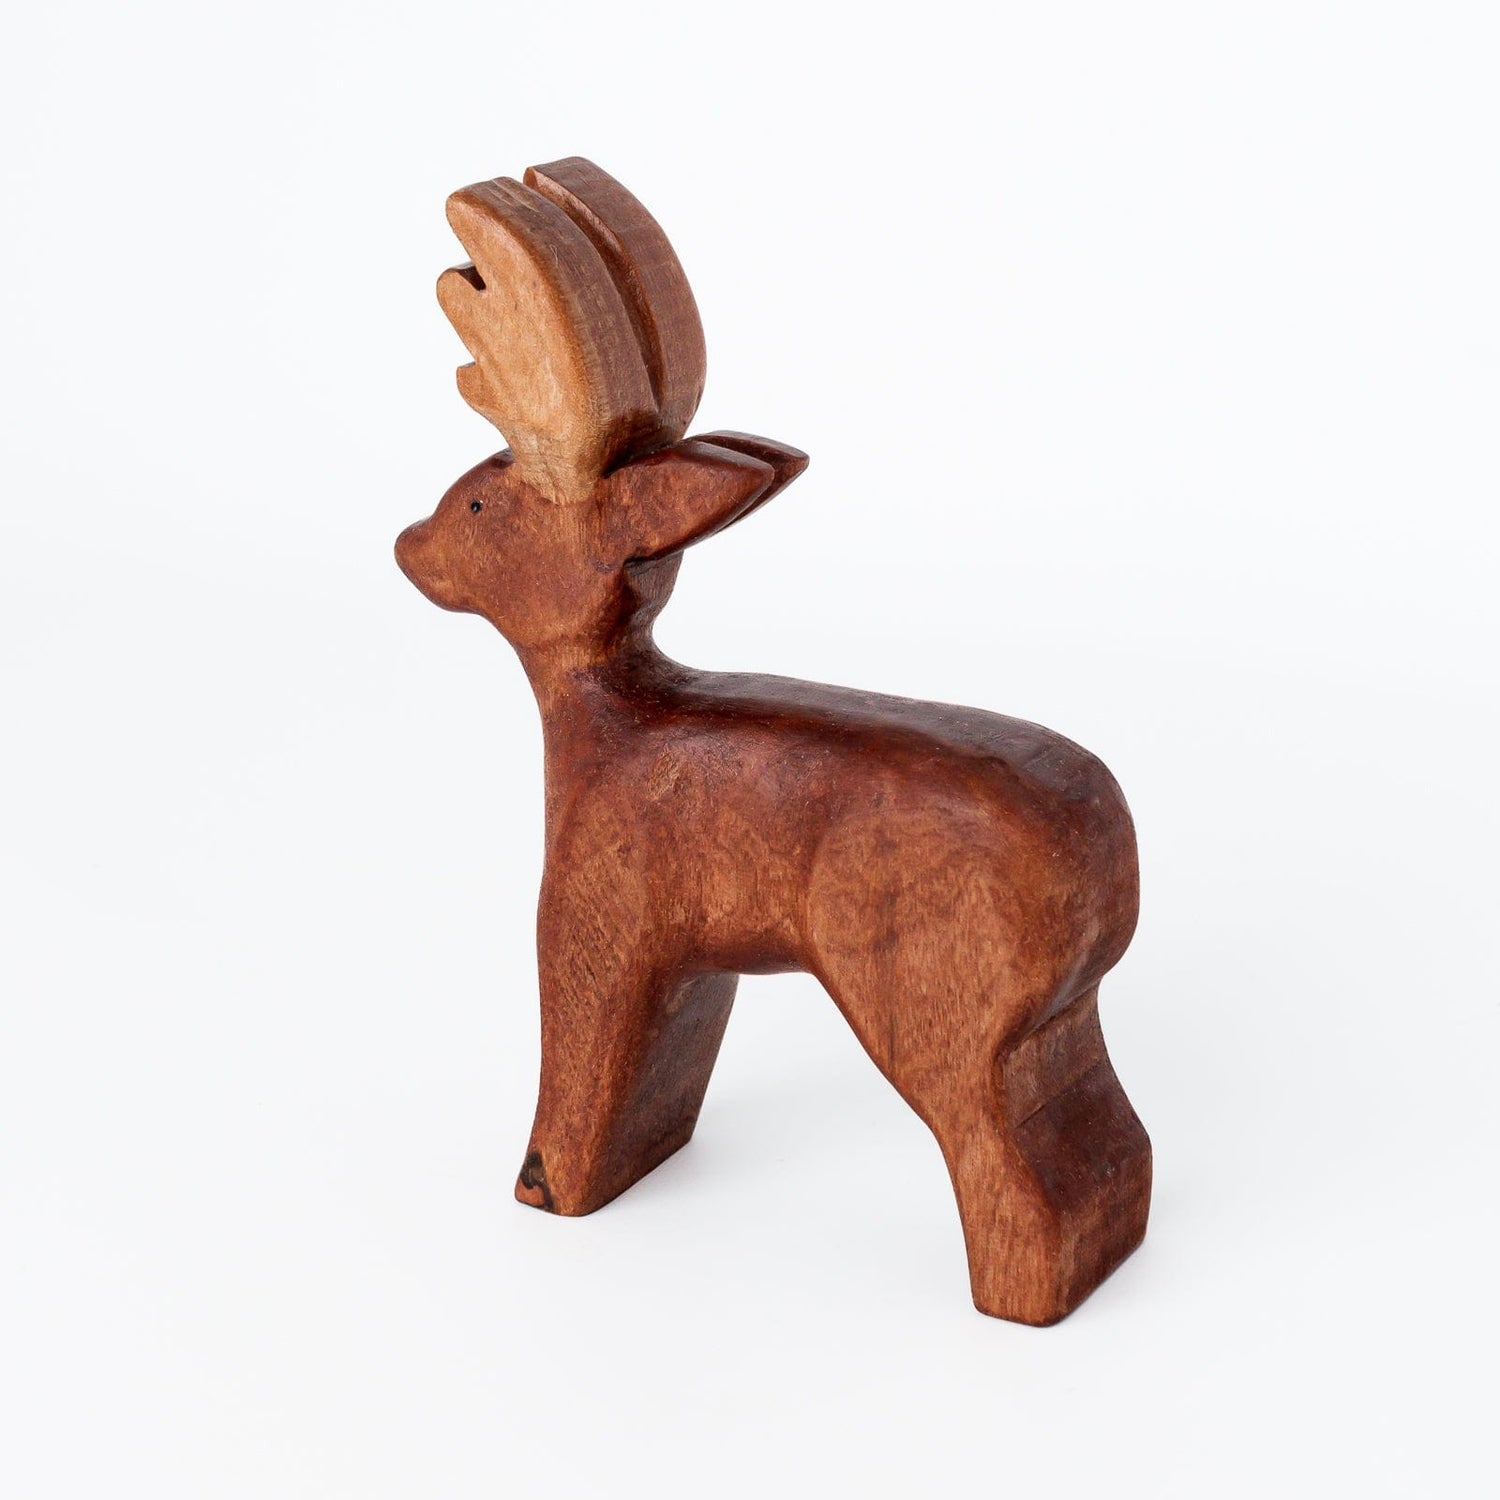 Bumbleberry Toys Wooden Animals "Stuart Stag" Wooden Animal Toy (Handmade in Canada)